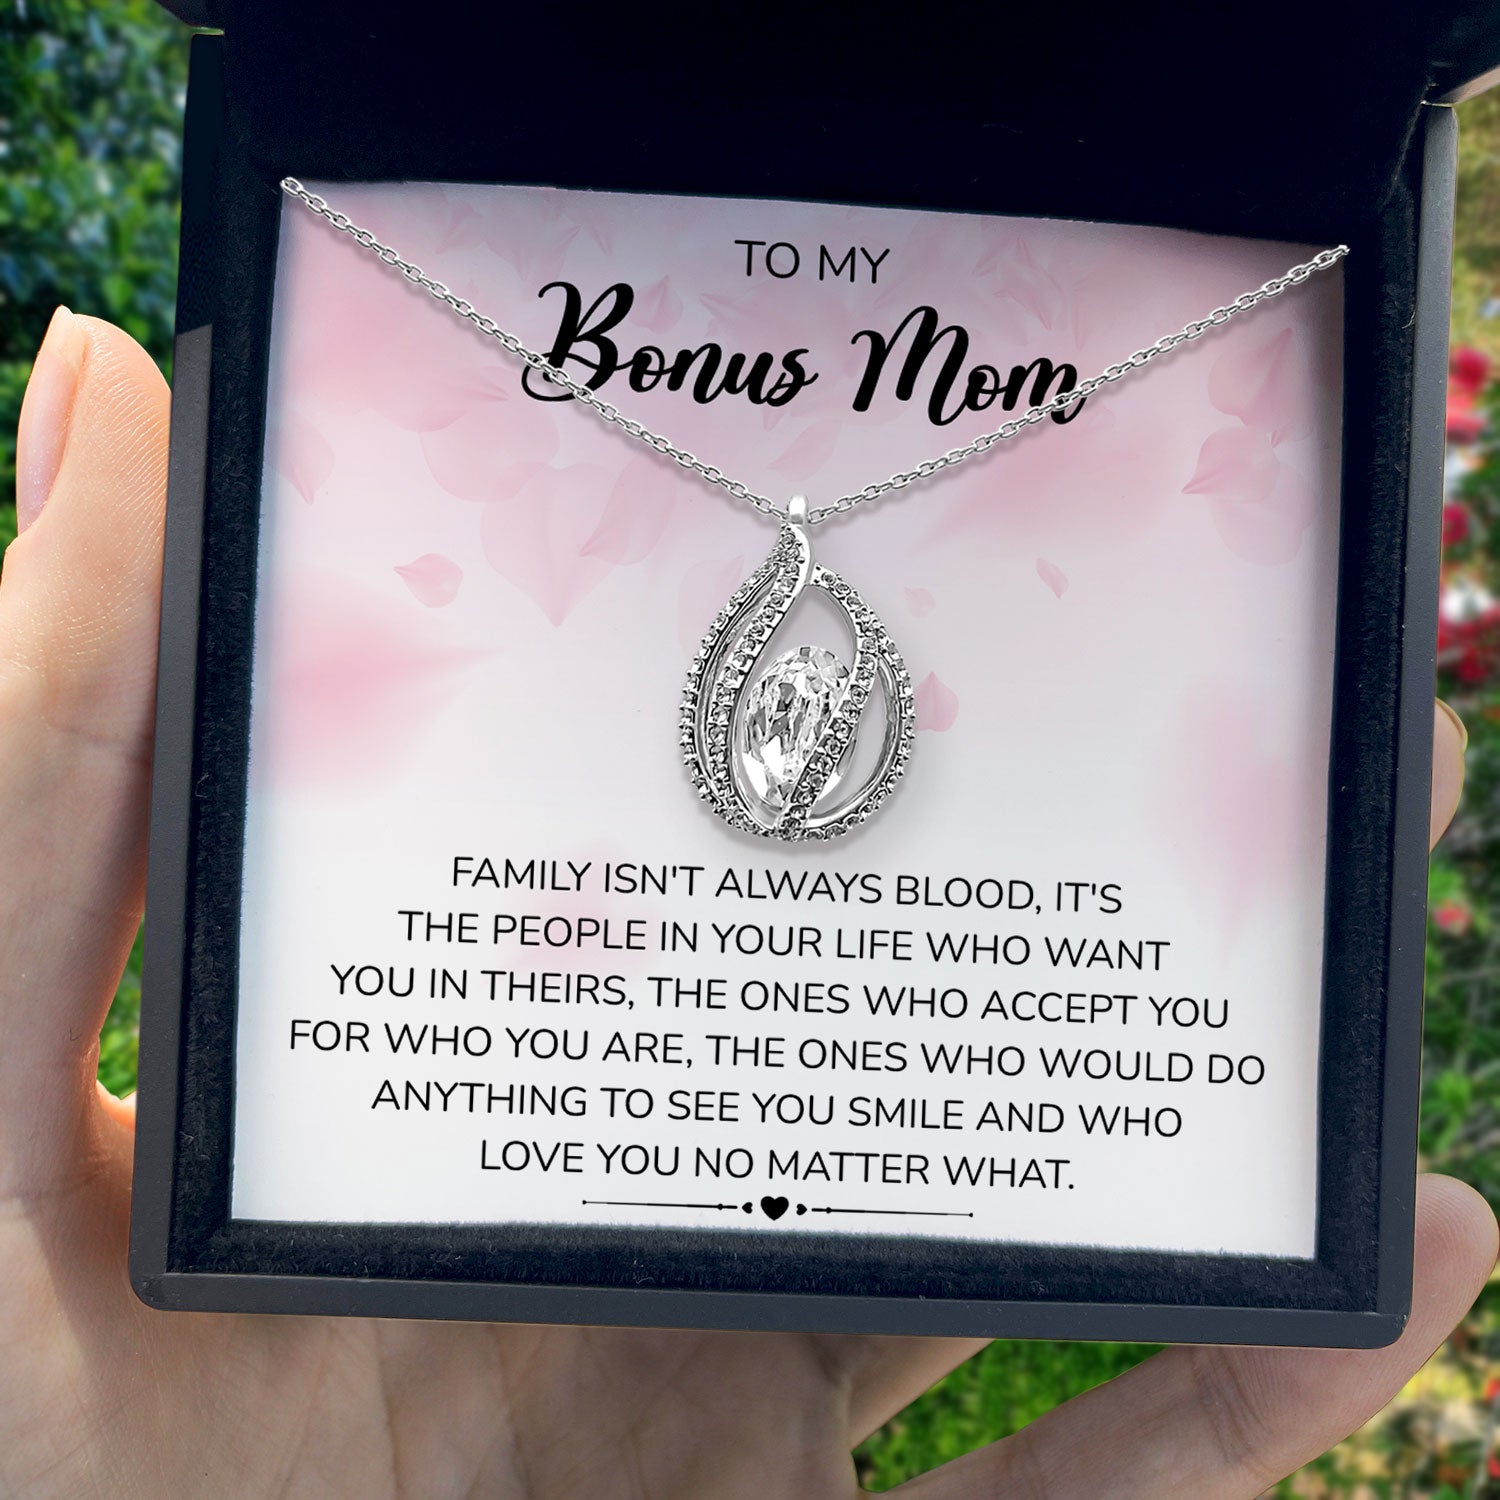 To My Bonus Mom - Family Isn't Always Blood,It's The People In Your Life Who Want You In Theirs - Orbital Birdcage Necklace